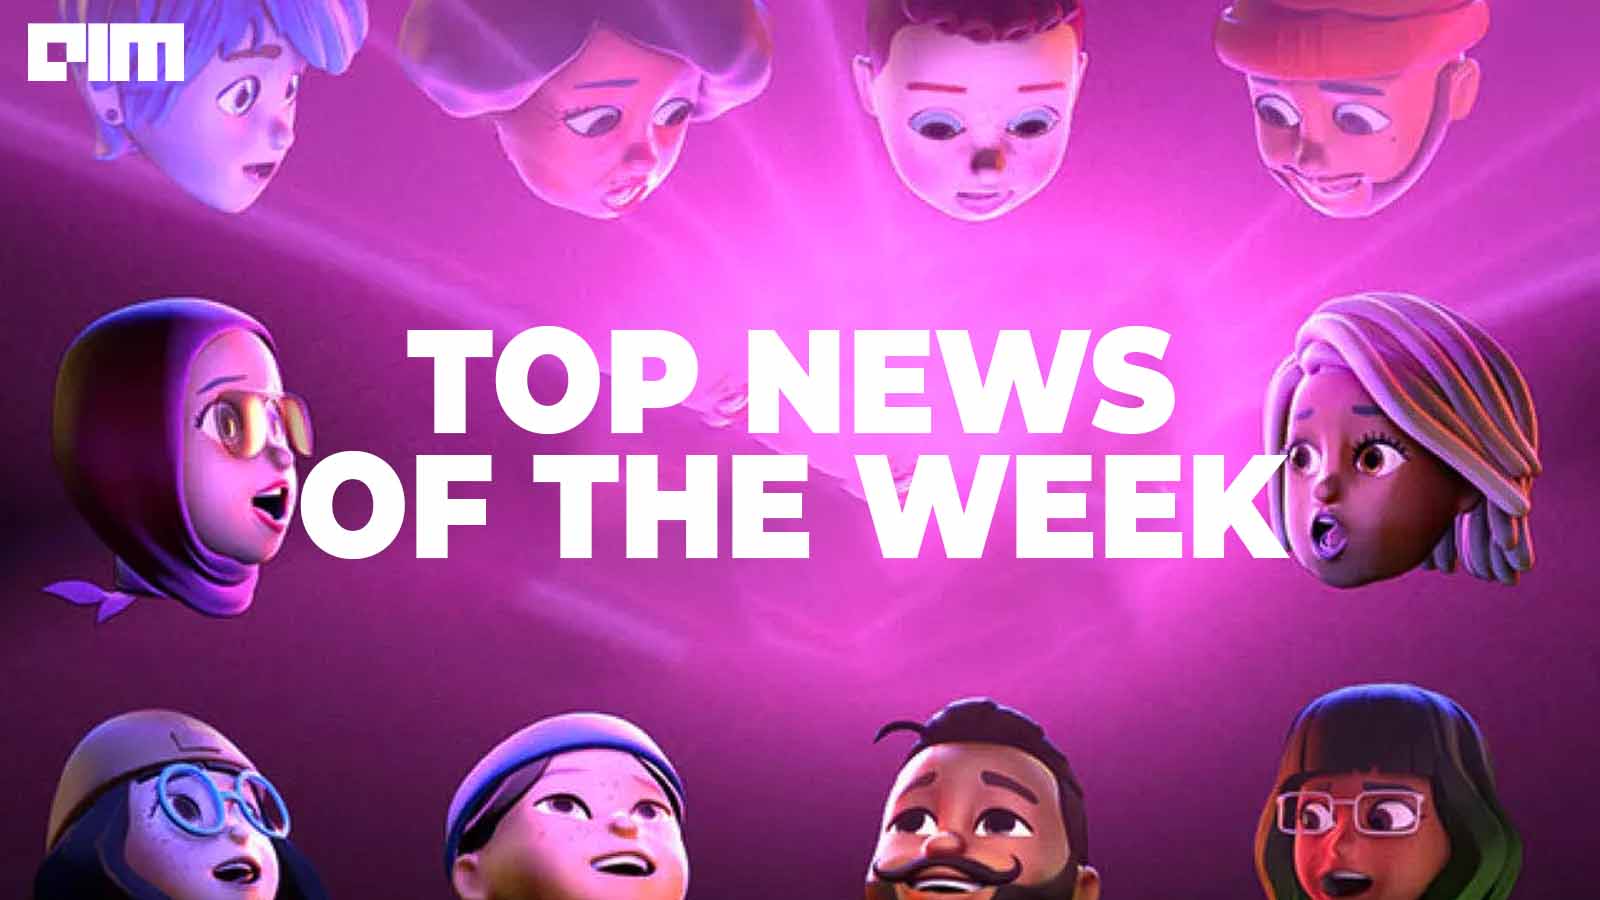 Apple WWDC, Intel Eyes SiFive And More In This Week’s Top News